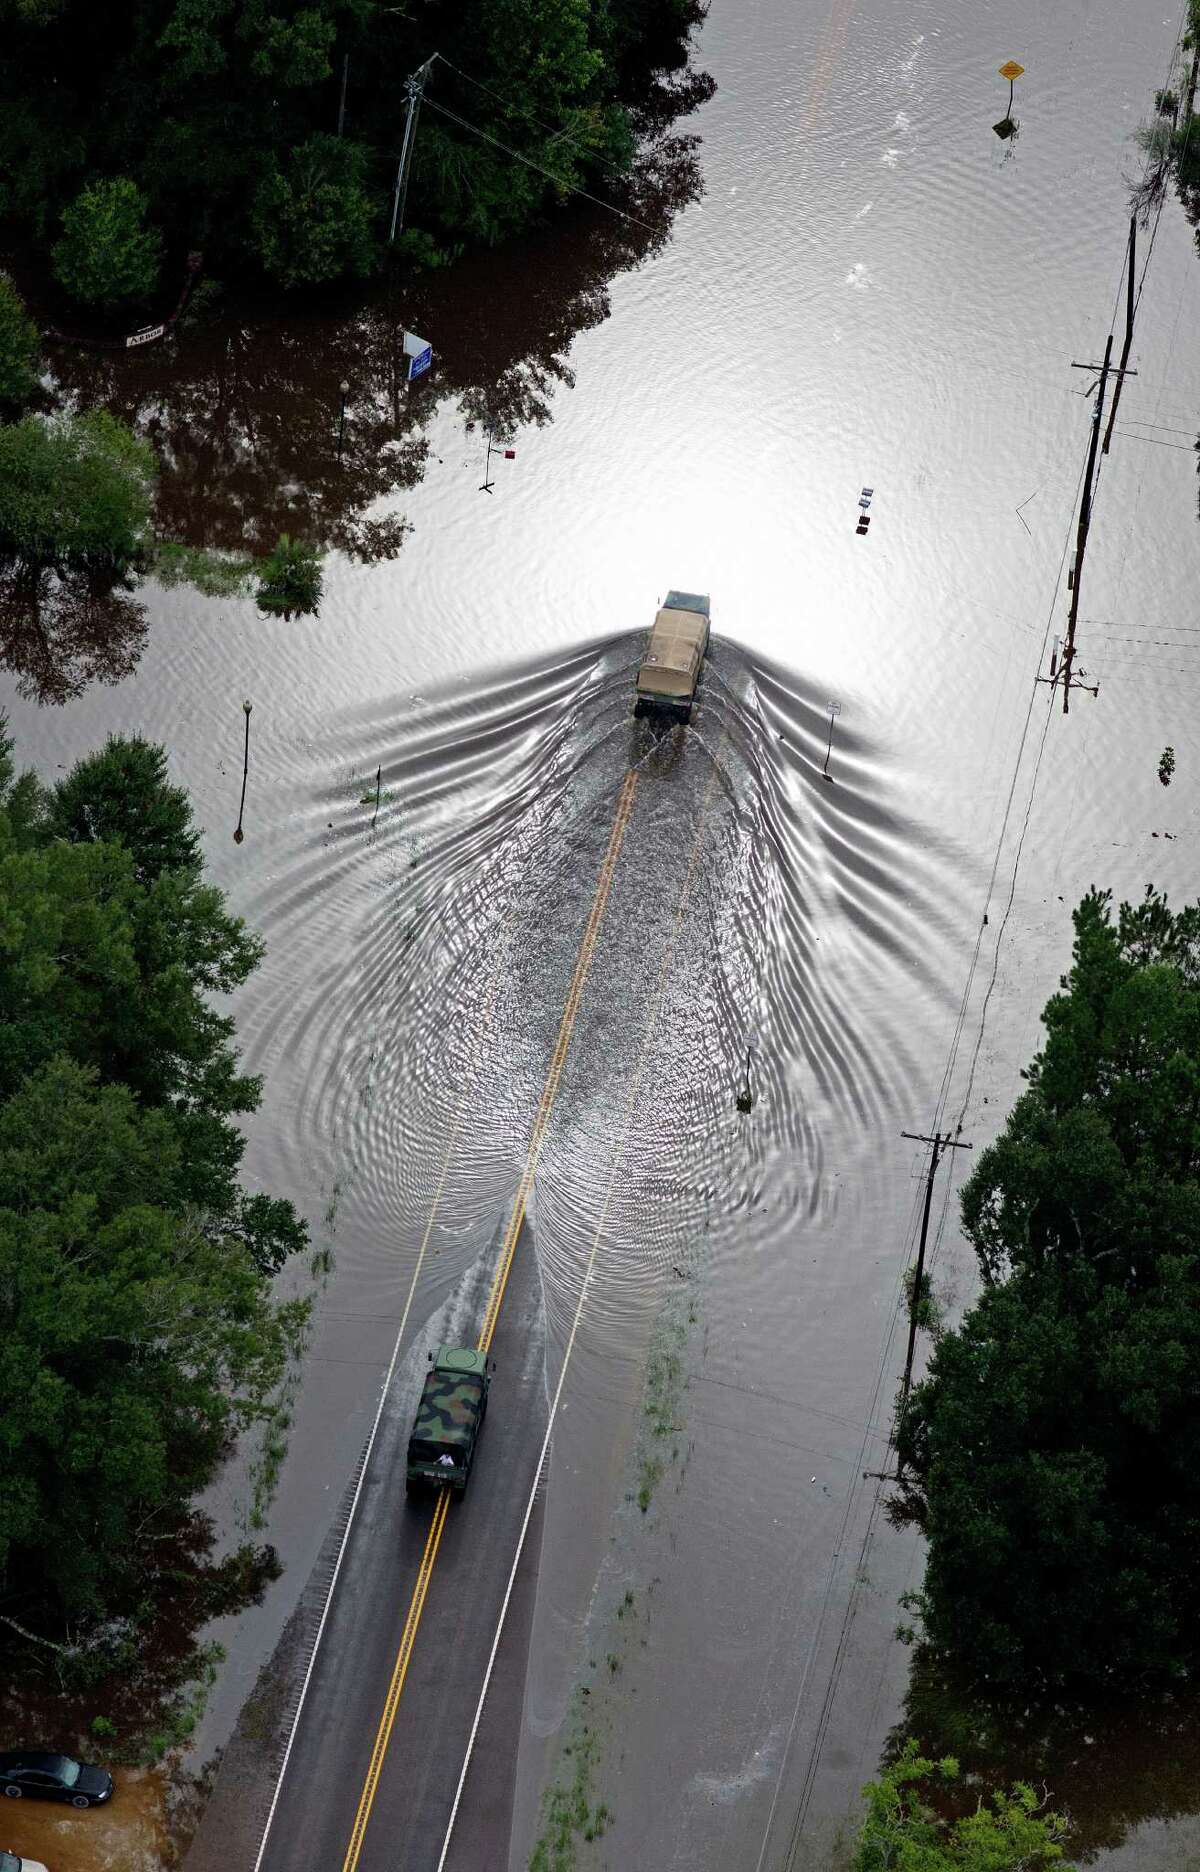 In this aerial photo over Robert, La., Army National Guard, vehicles drive on flooded U.S. Route 190 after heavy rains inundated the region, Saturday, Aug. 13, 2016. Louisiana Gov. John Bel Edwards says more than 1,000 people in south Louisiana have been rescued from homes, vehicles and even clinging to trees as a slow-moving storm hammers the state with flooding. (AP Photo/Max Becherer)